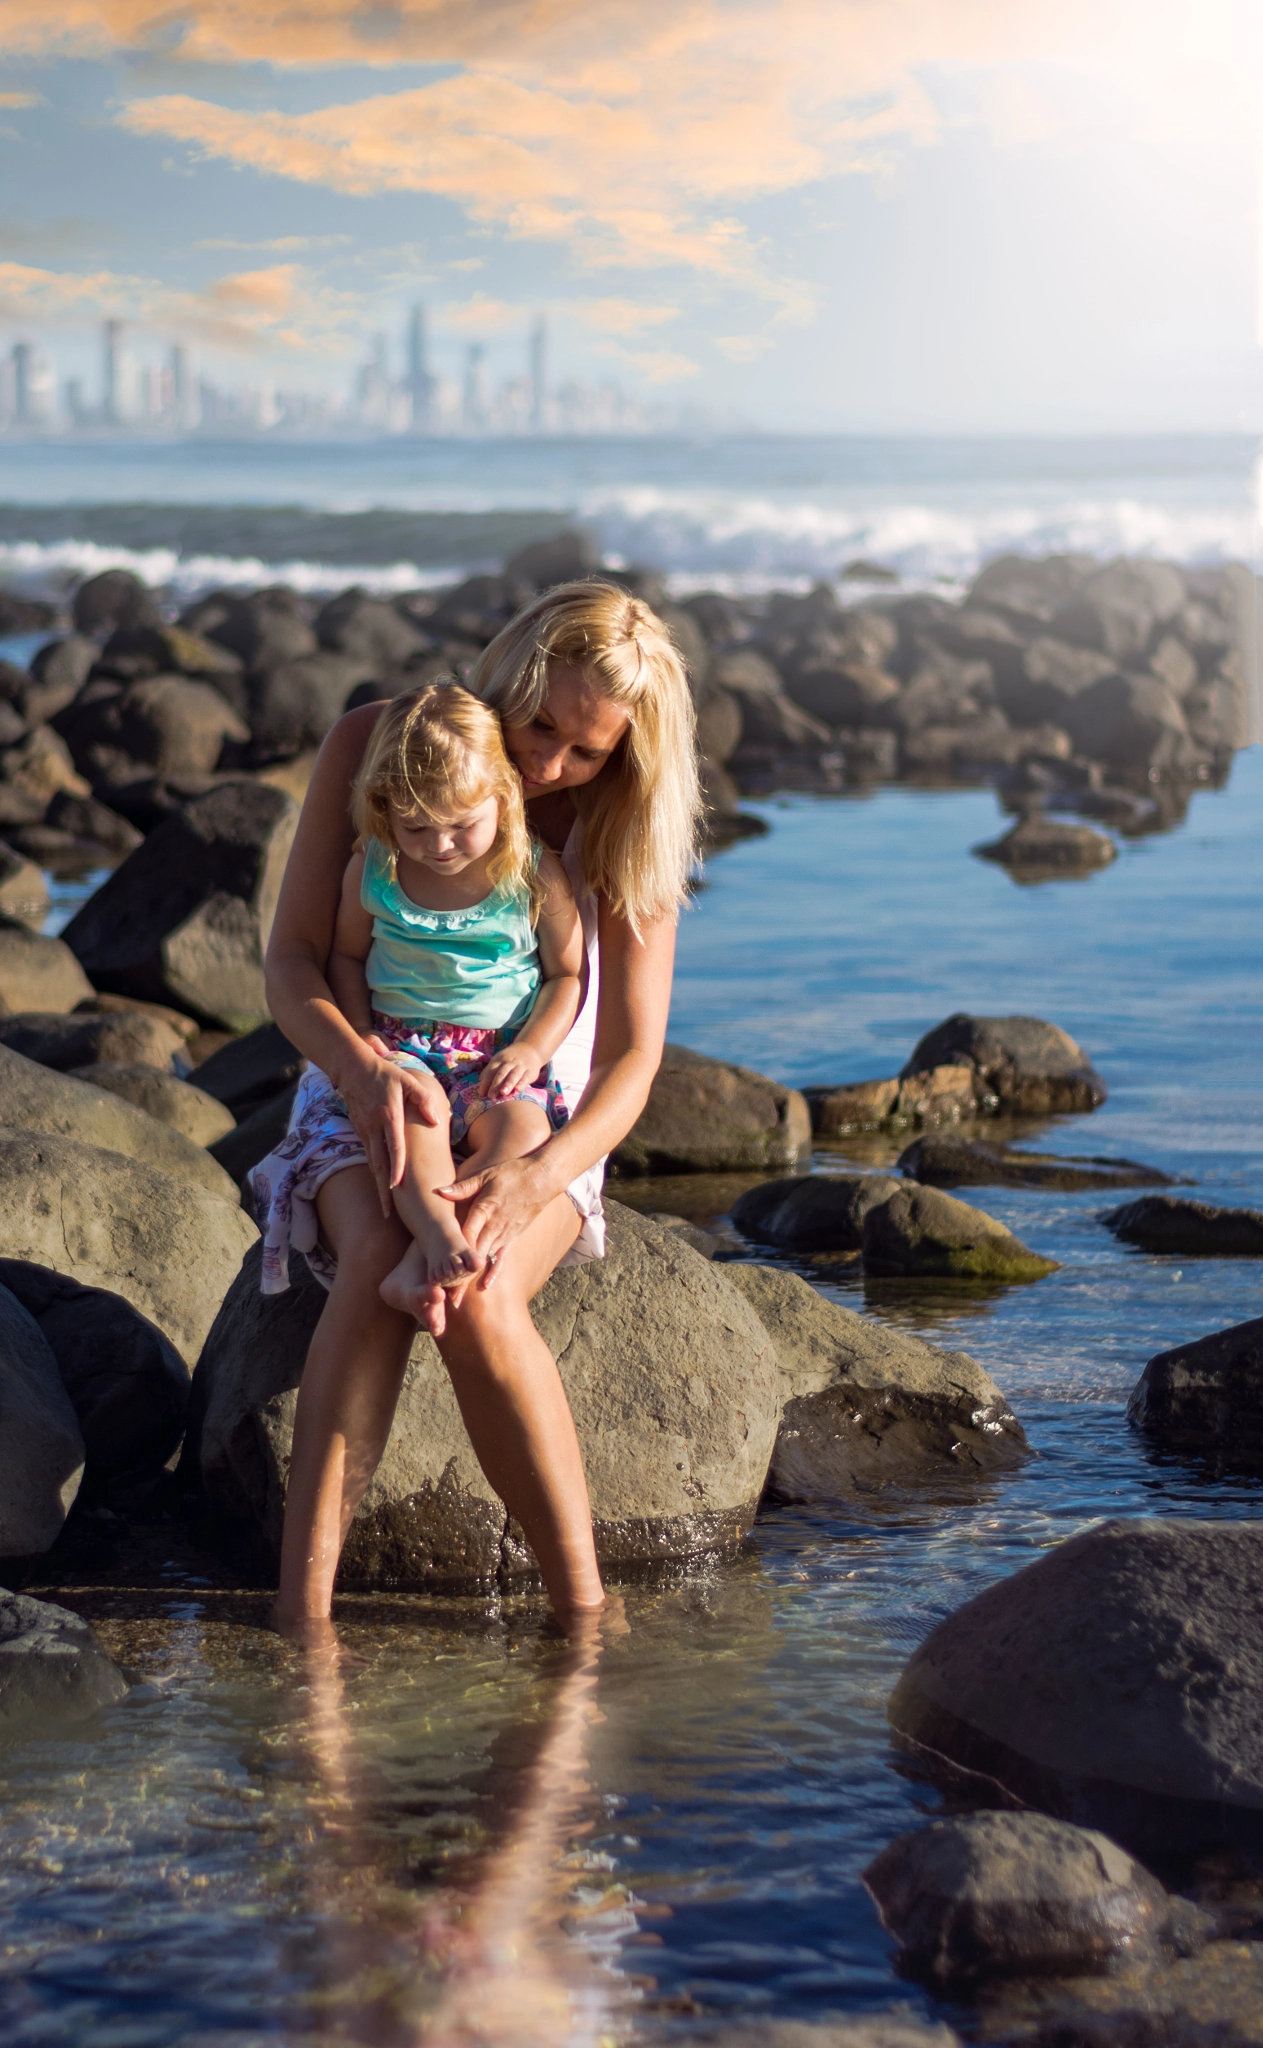 Nikon D5200 + AF-S DX VR Zoom-Nikkor 18-55mm f/3.5-5.6G + 2.8x sample photo. Mother, daughter & serenity photography